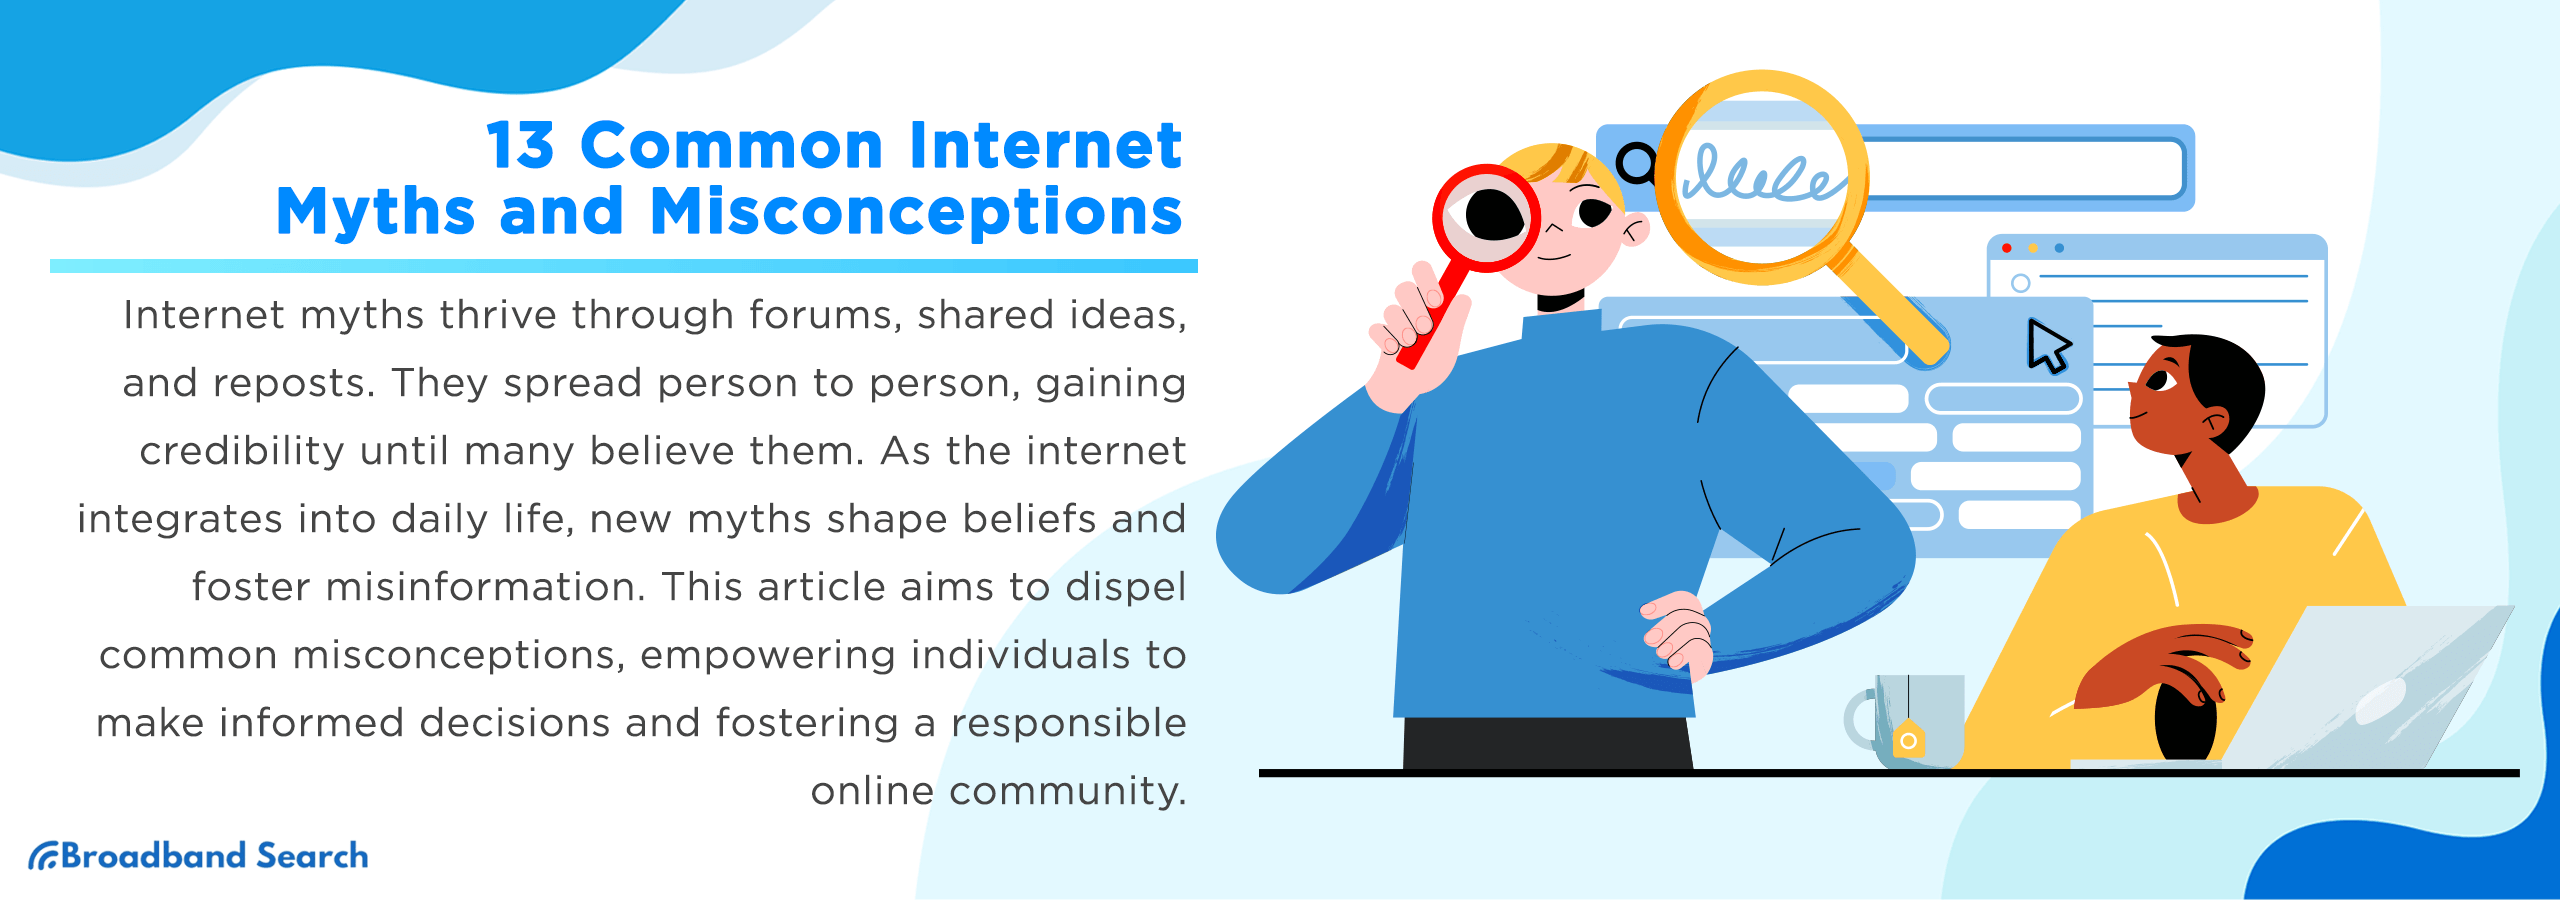 13 Common Internet Myths And Misconceptions